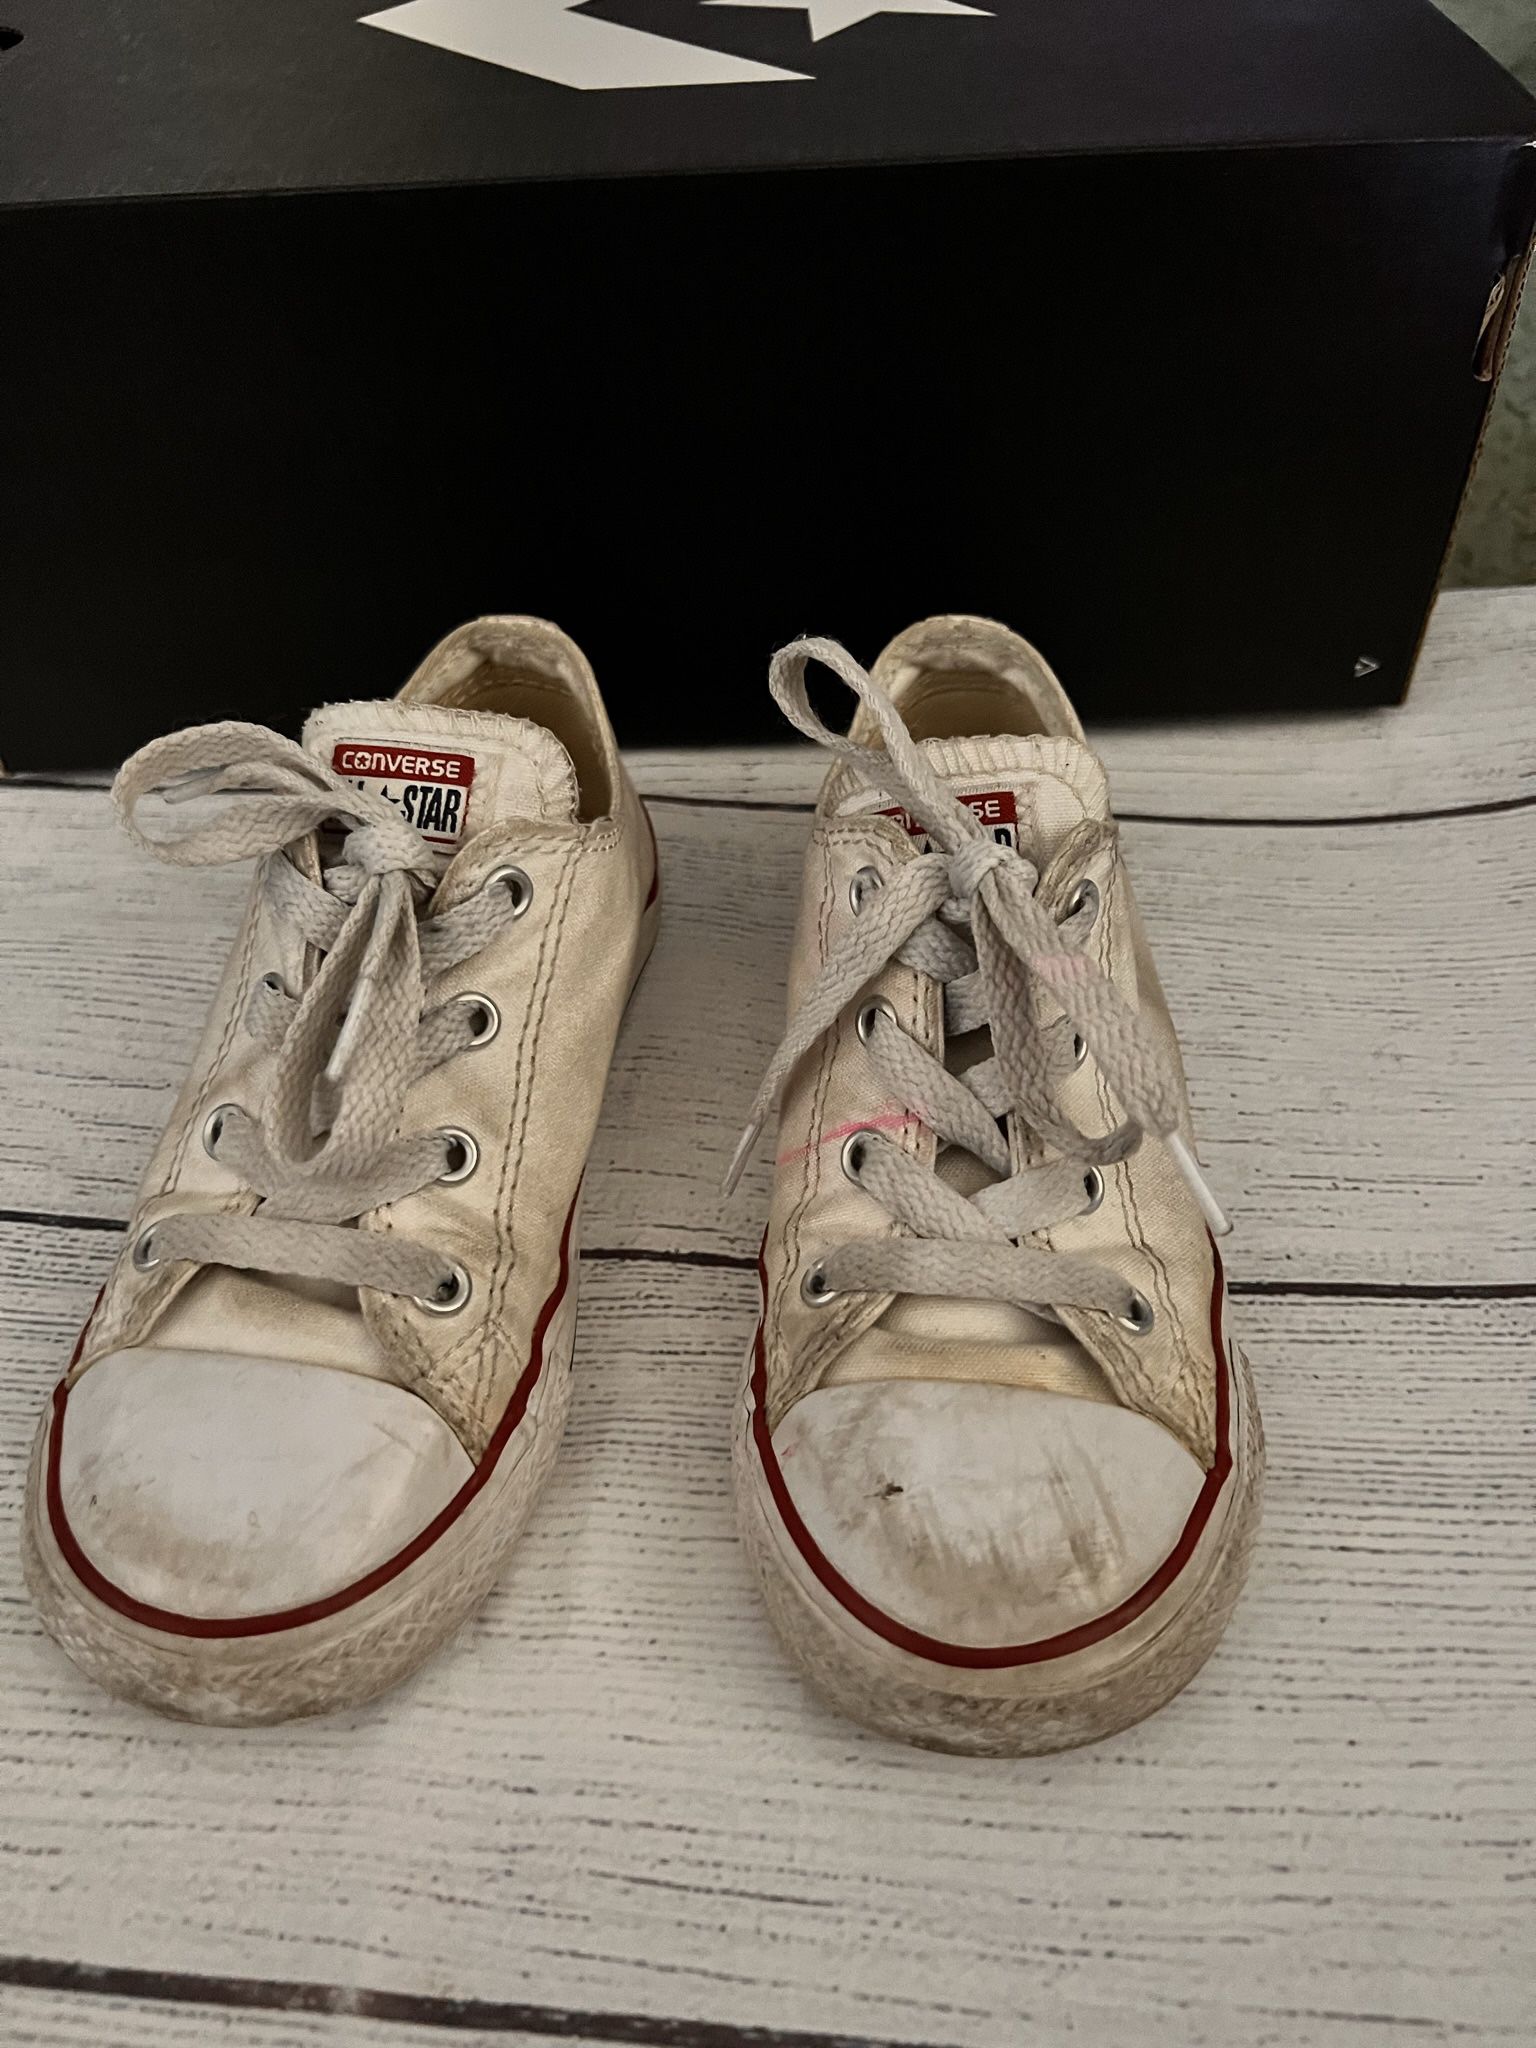 tro Rotere fup Kids Converse for Sale in Moreno Valley, CA - OfferUp